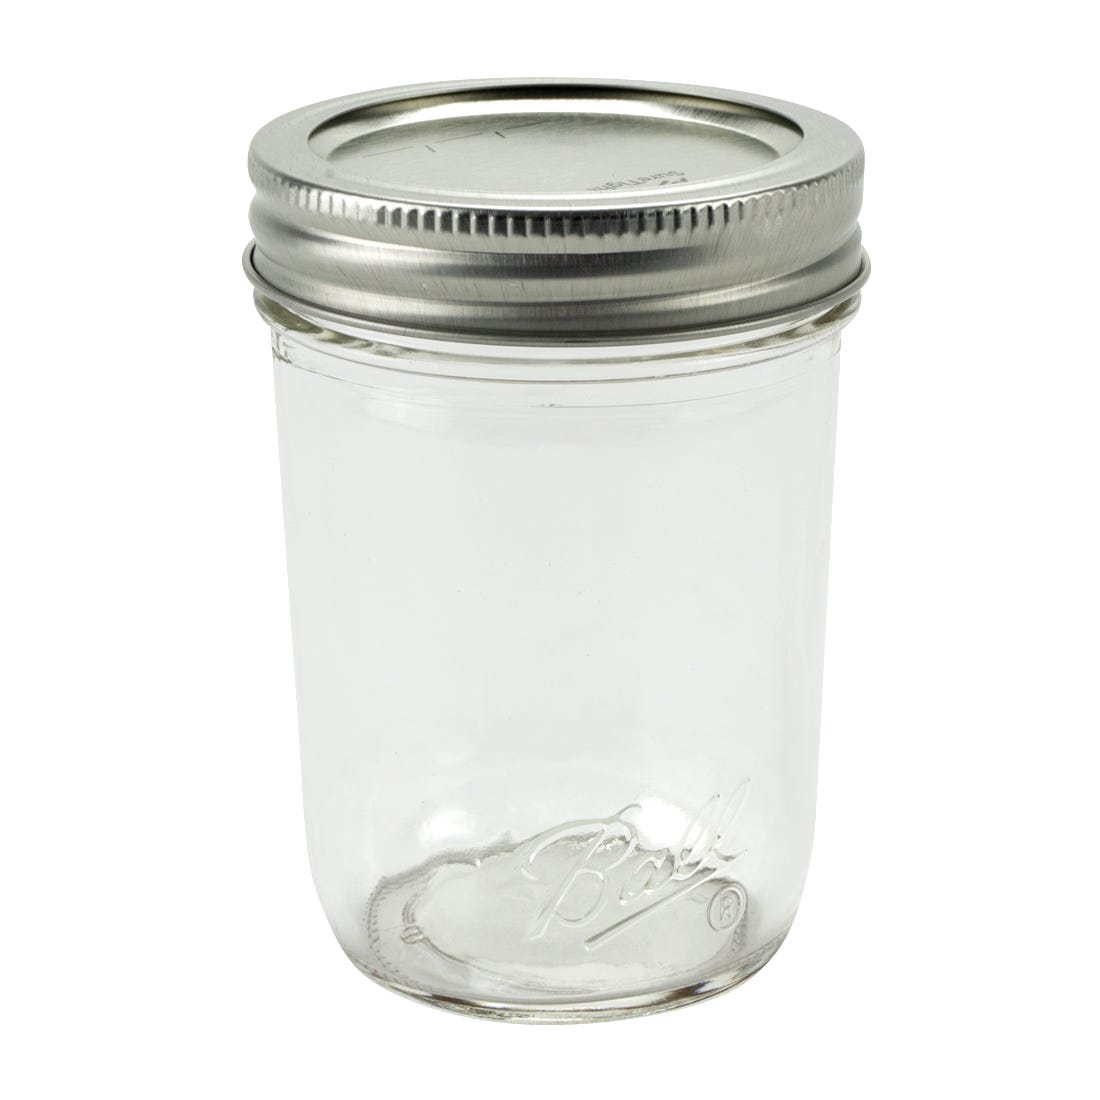 Wholesale Containers: 8 oz Ball Canning Jars | Fillmore Container